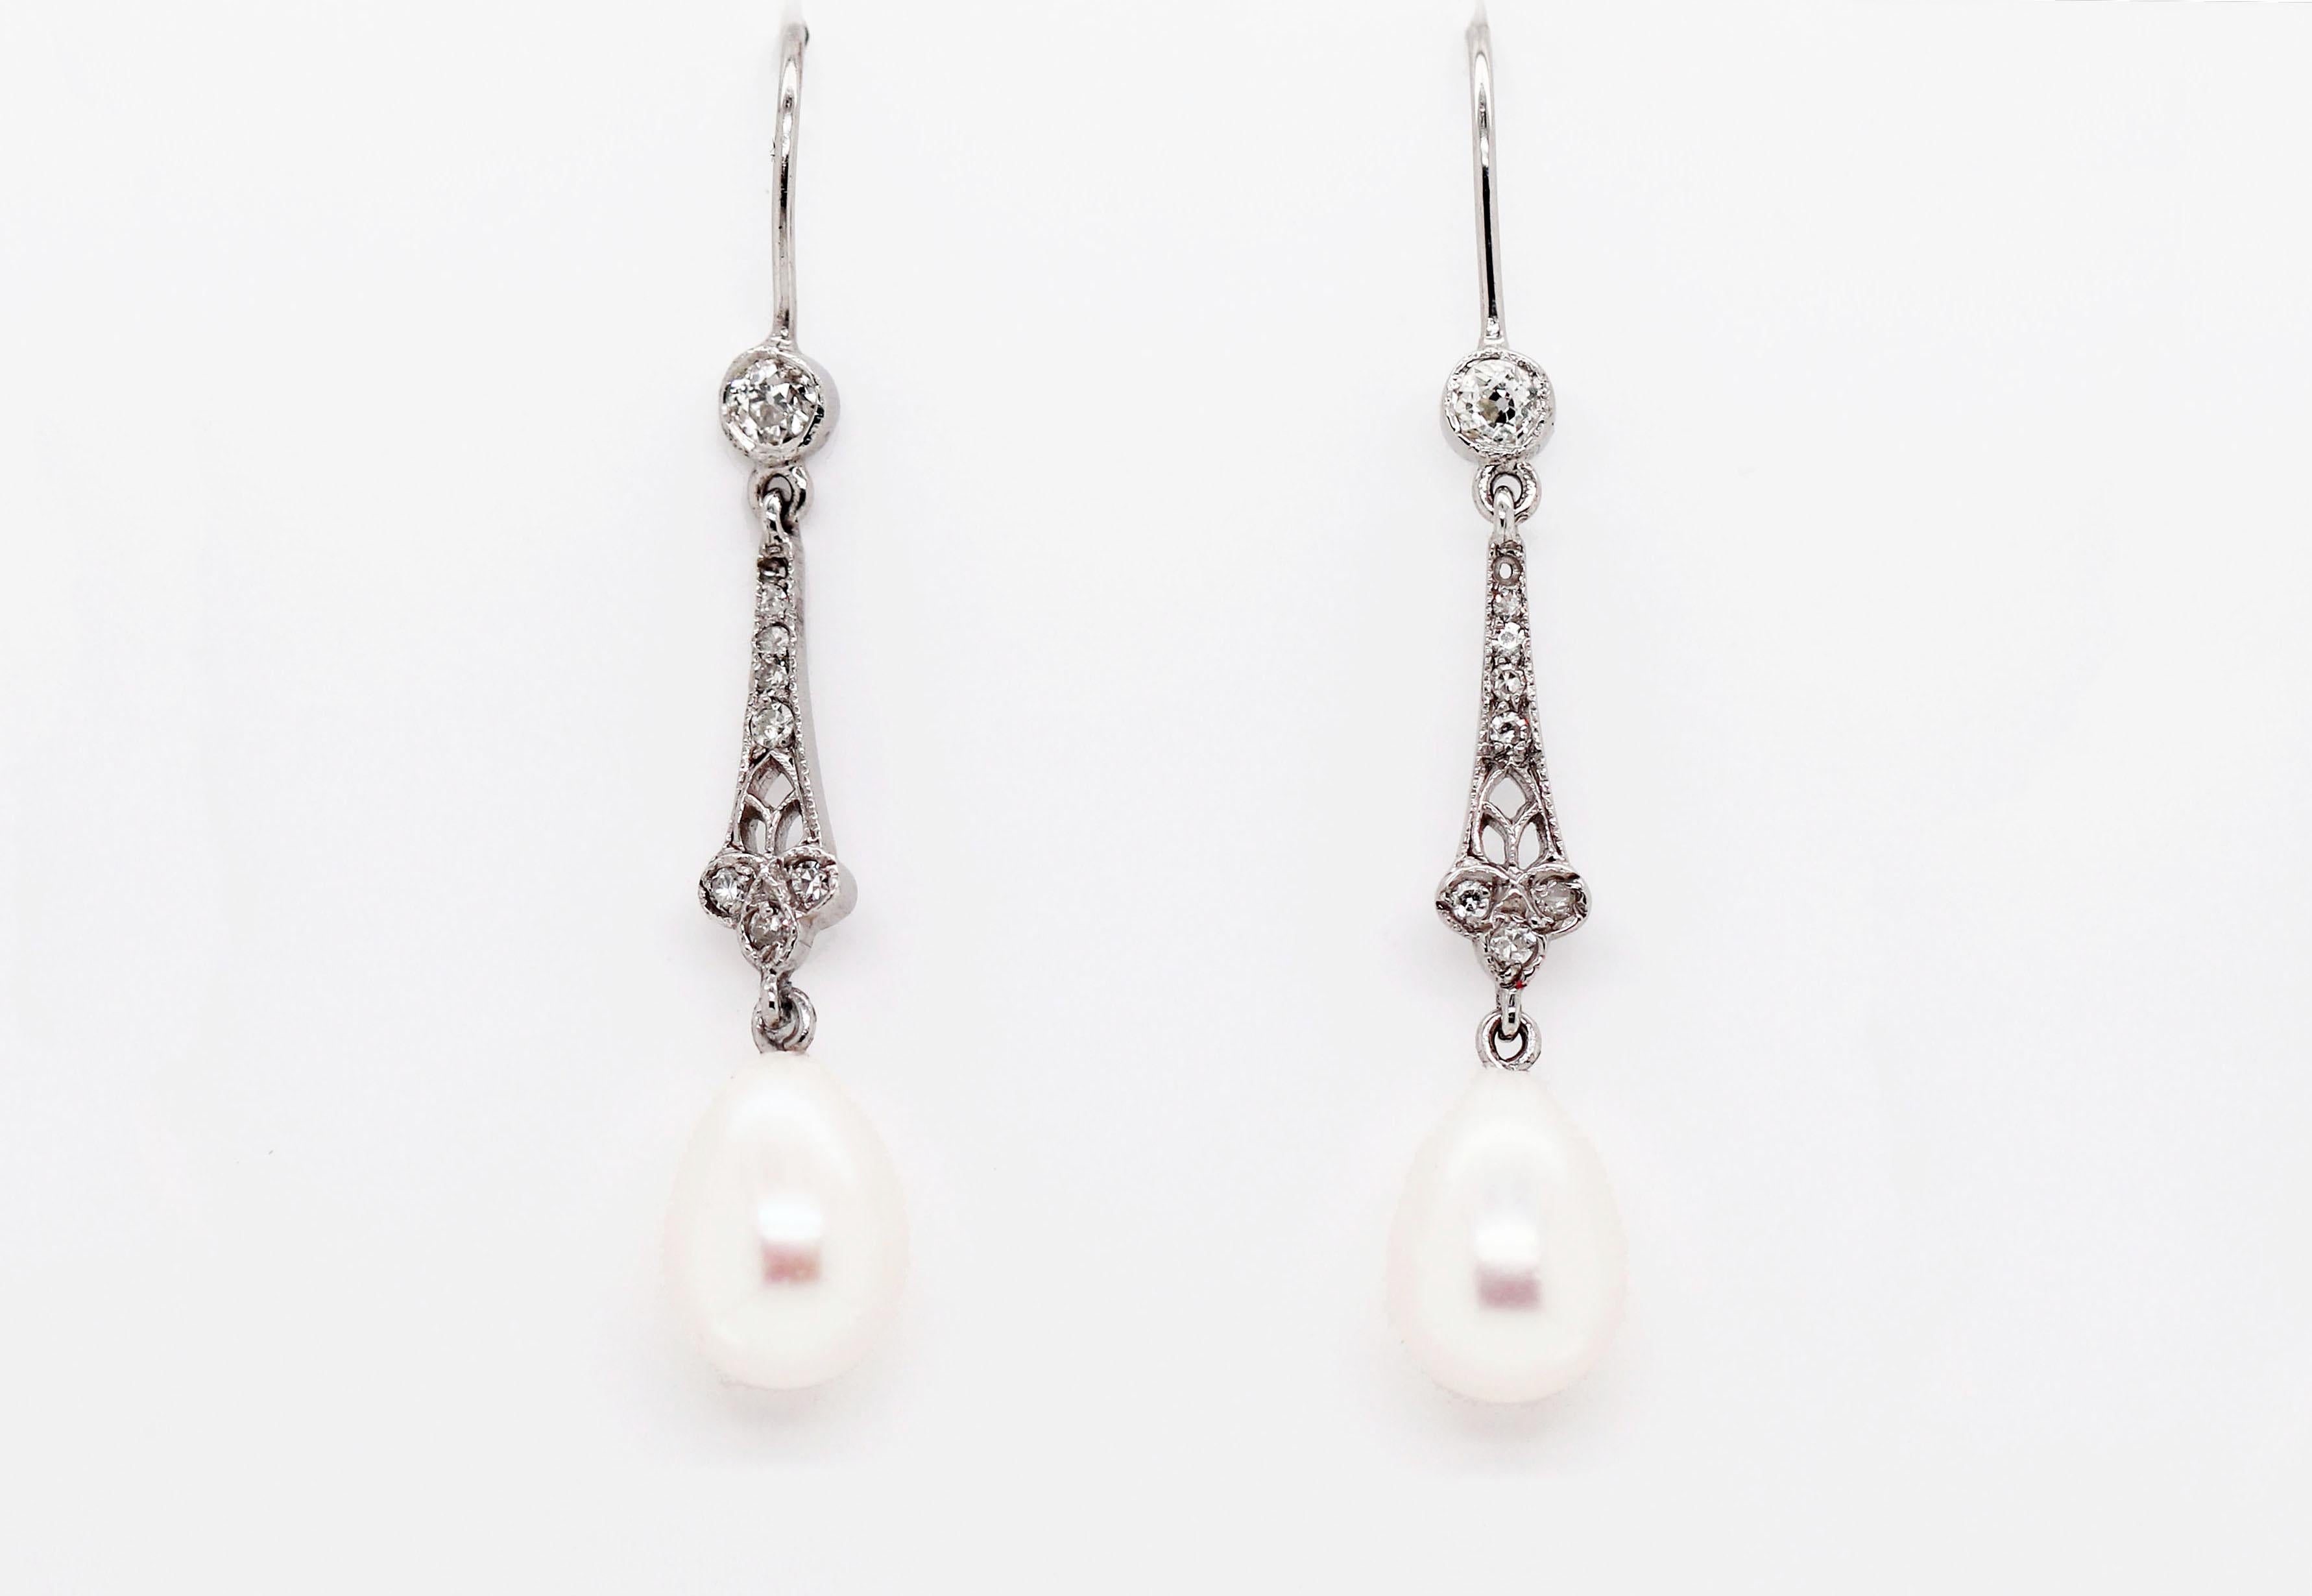 Beautifully delicate pair of drop earrings featuring teardrop cultured pearls hanging from an intricate open work design set with eight old cut diamonds in milgrain settings and finished with a larger diamond at the top in a rub over milgrain